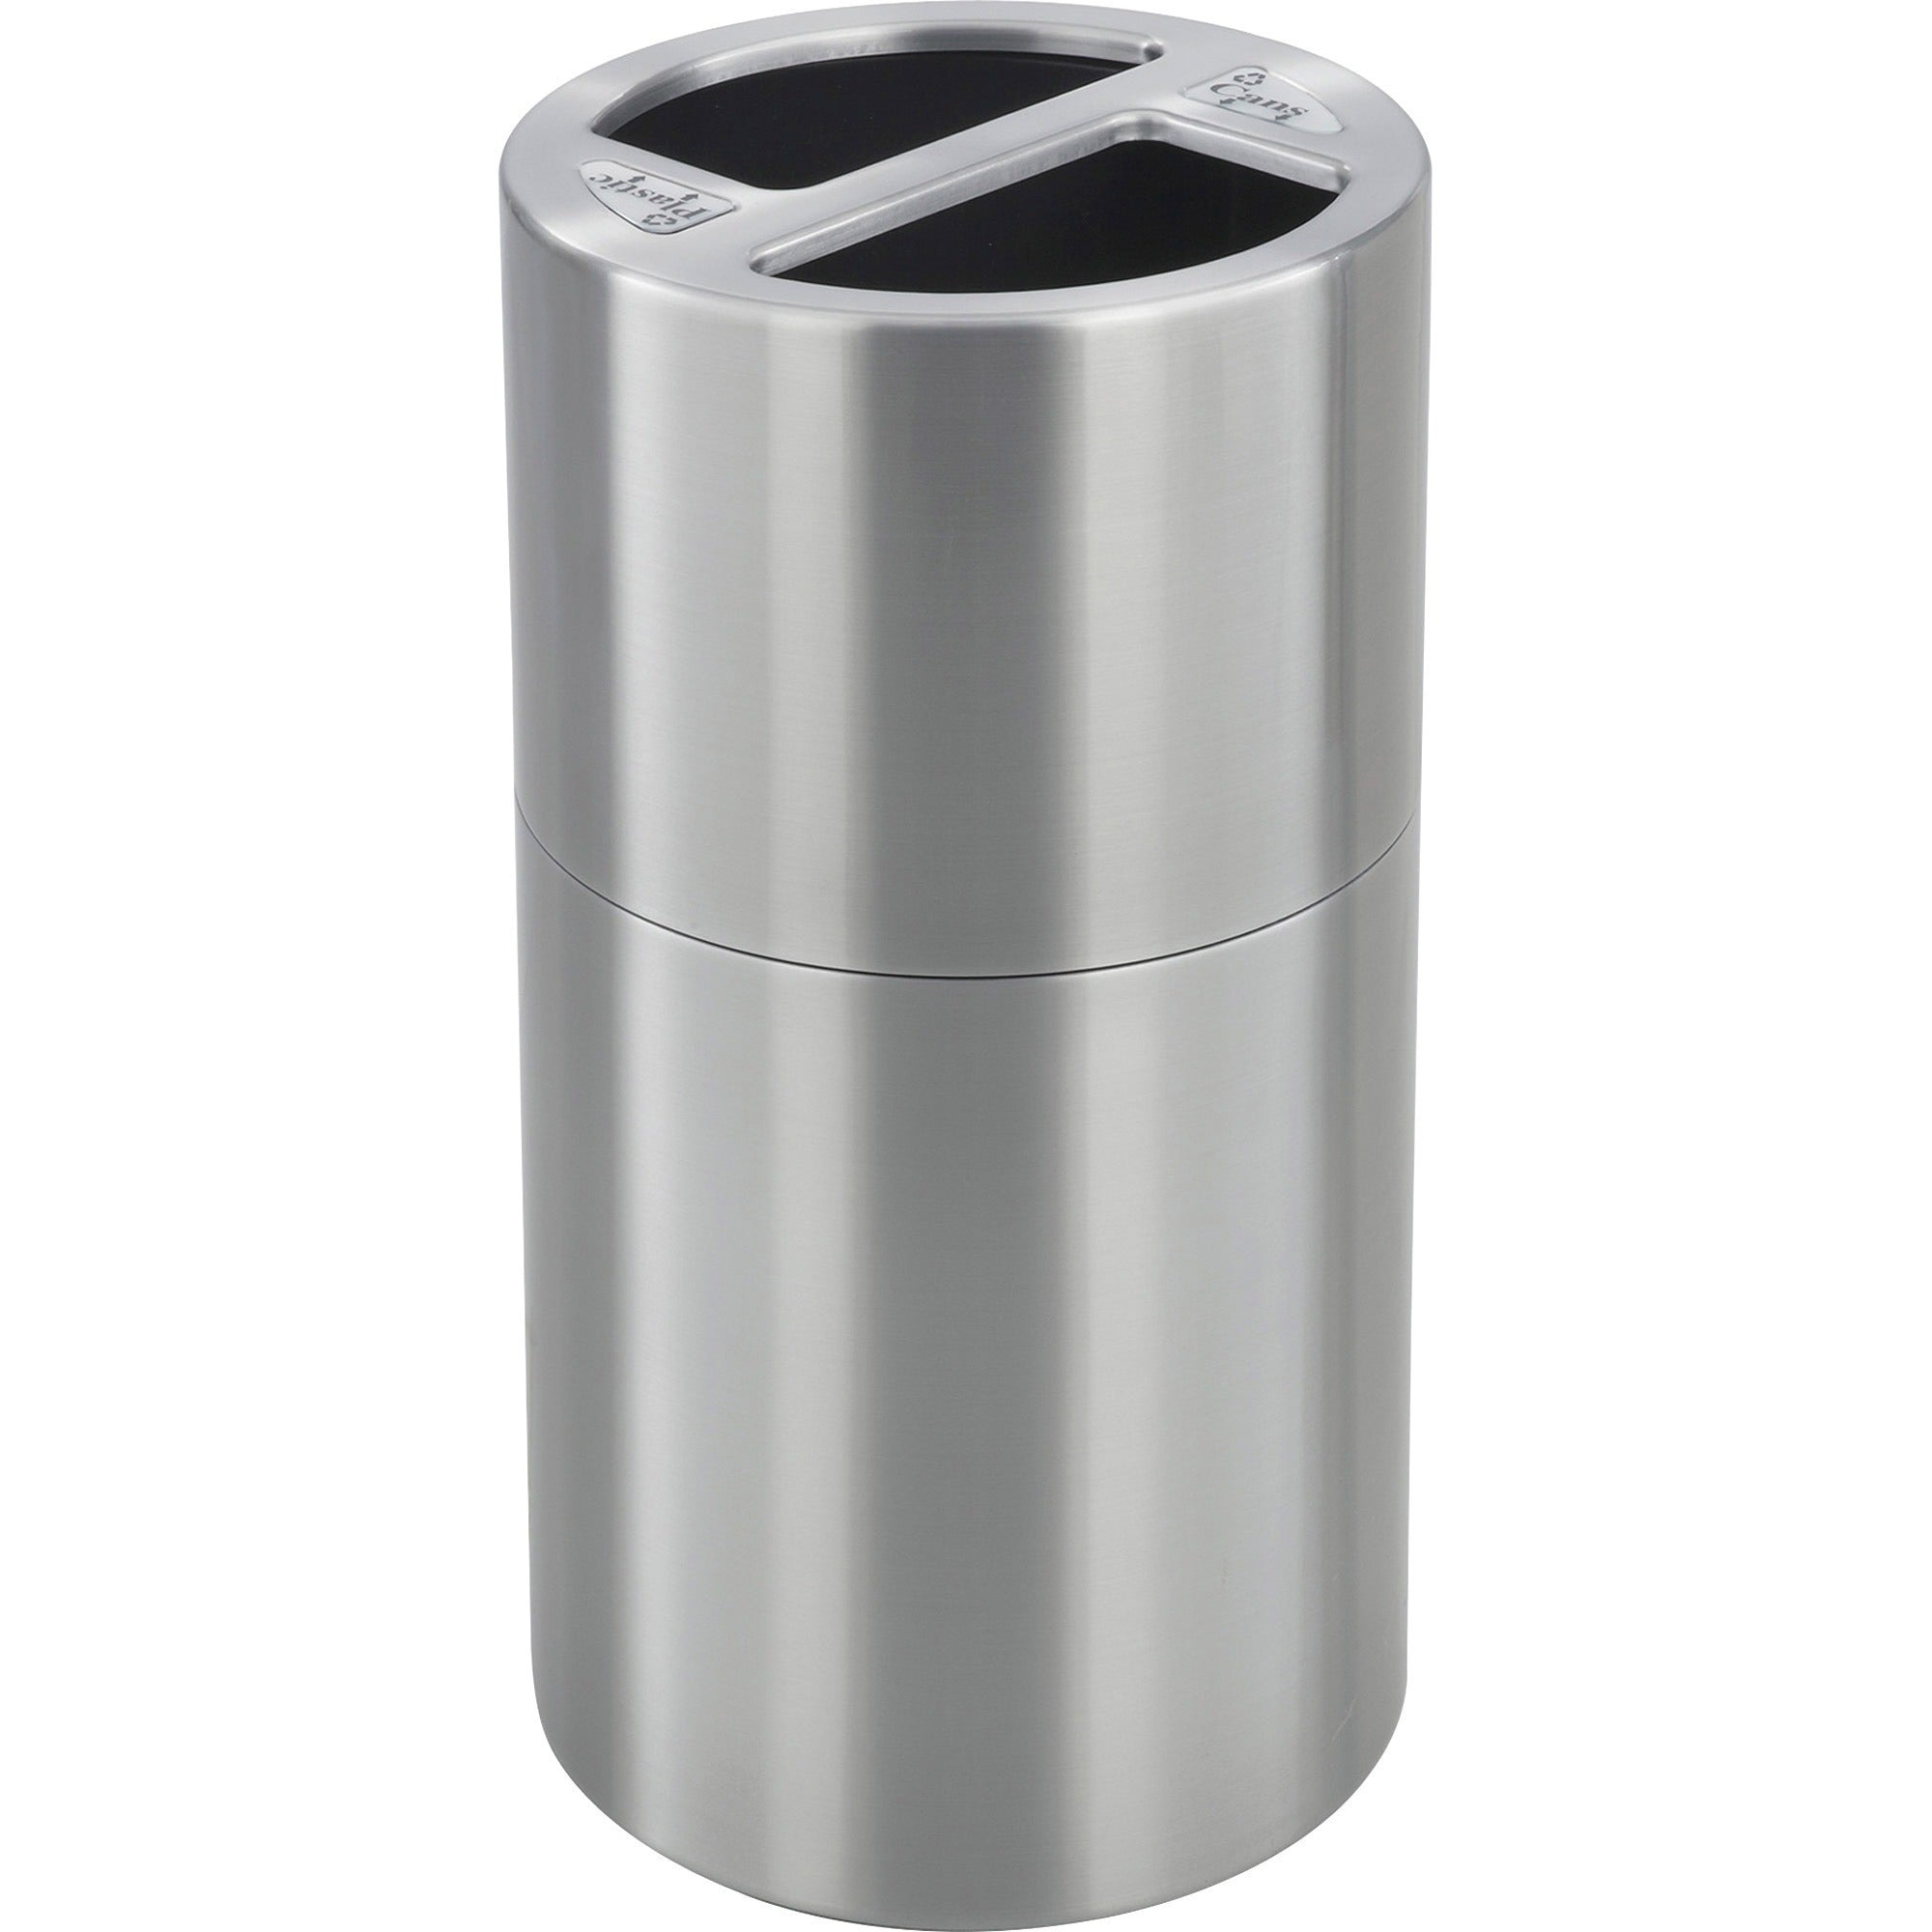 safco-dual-recycling-receptacle-30-gal-capacity-325-height-x-175-diameter-aluminum-stainless-steel-1-each_saf9931ss - 1